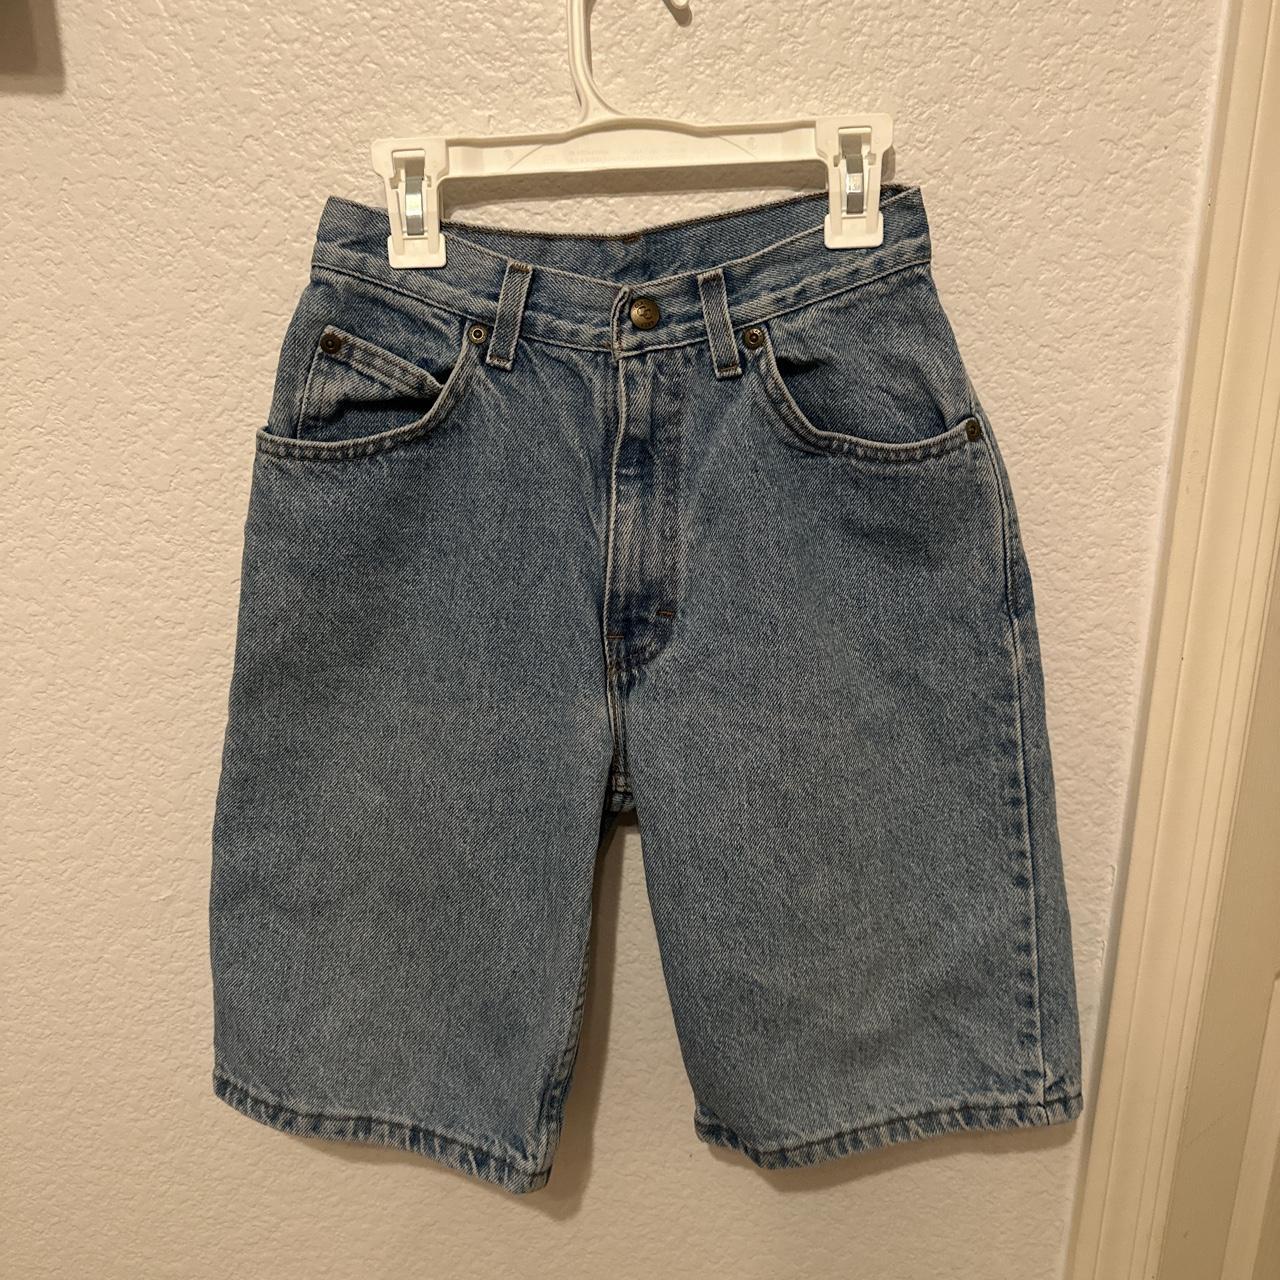 Jorts fits a size 24-25 waist thrifted but in... - Depop